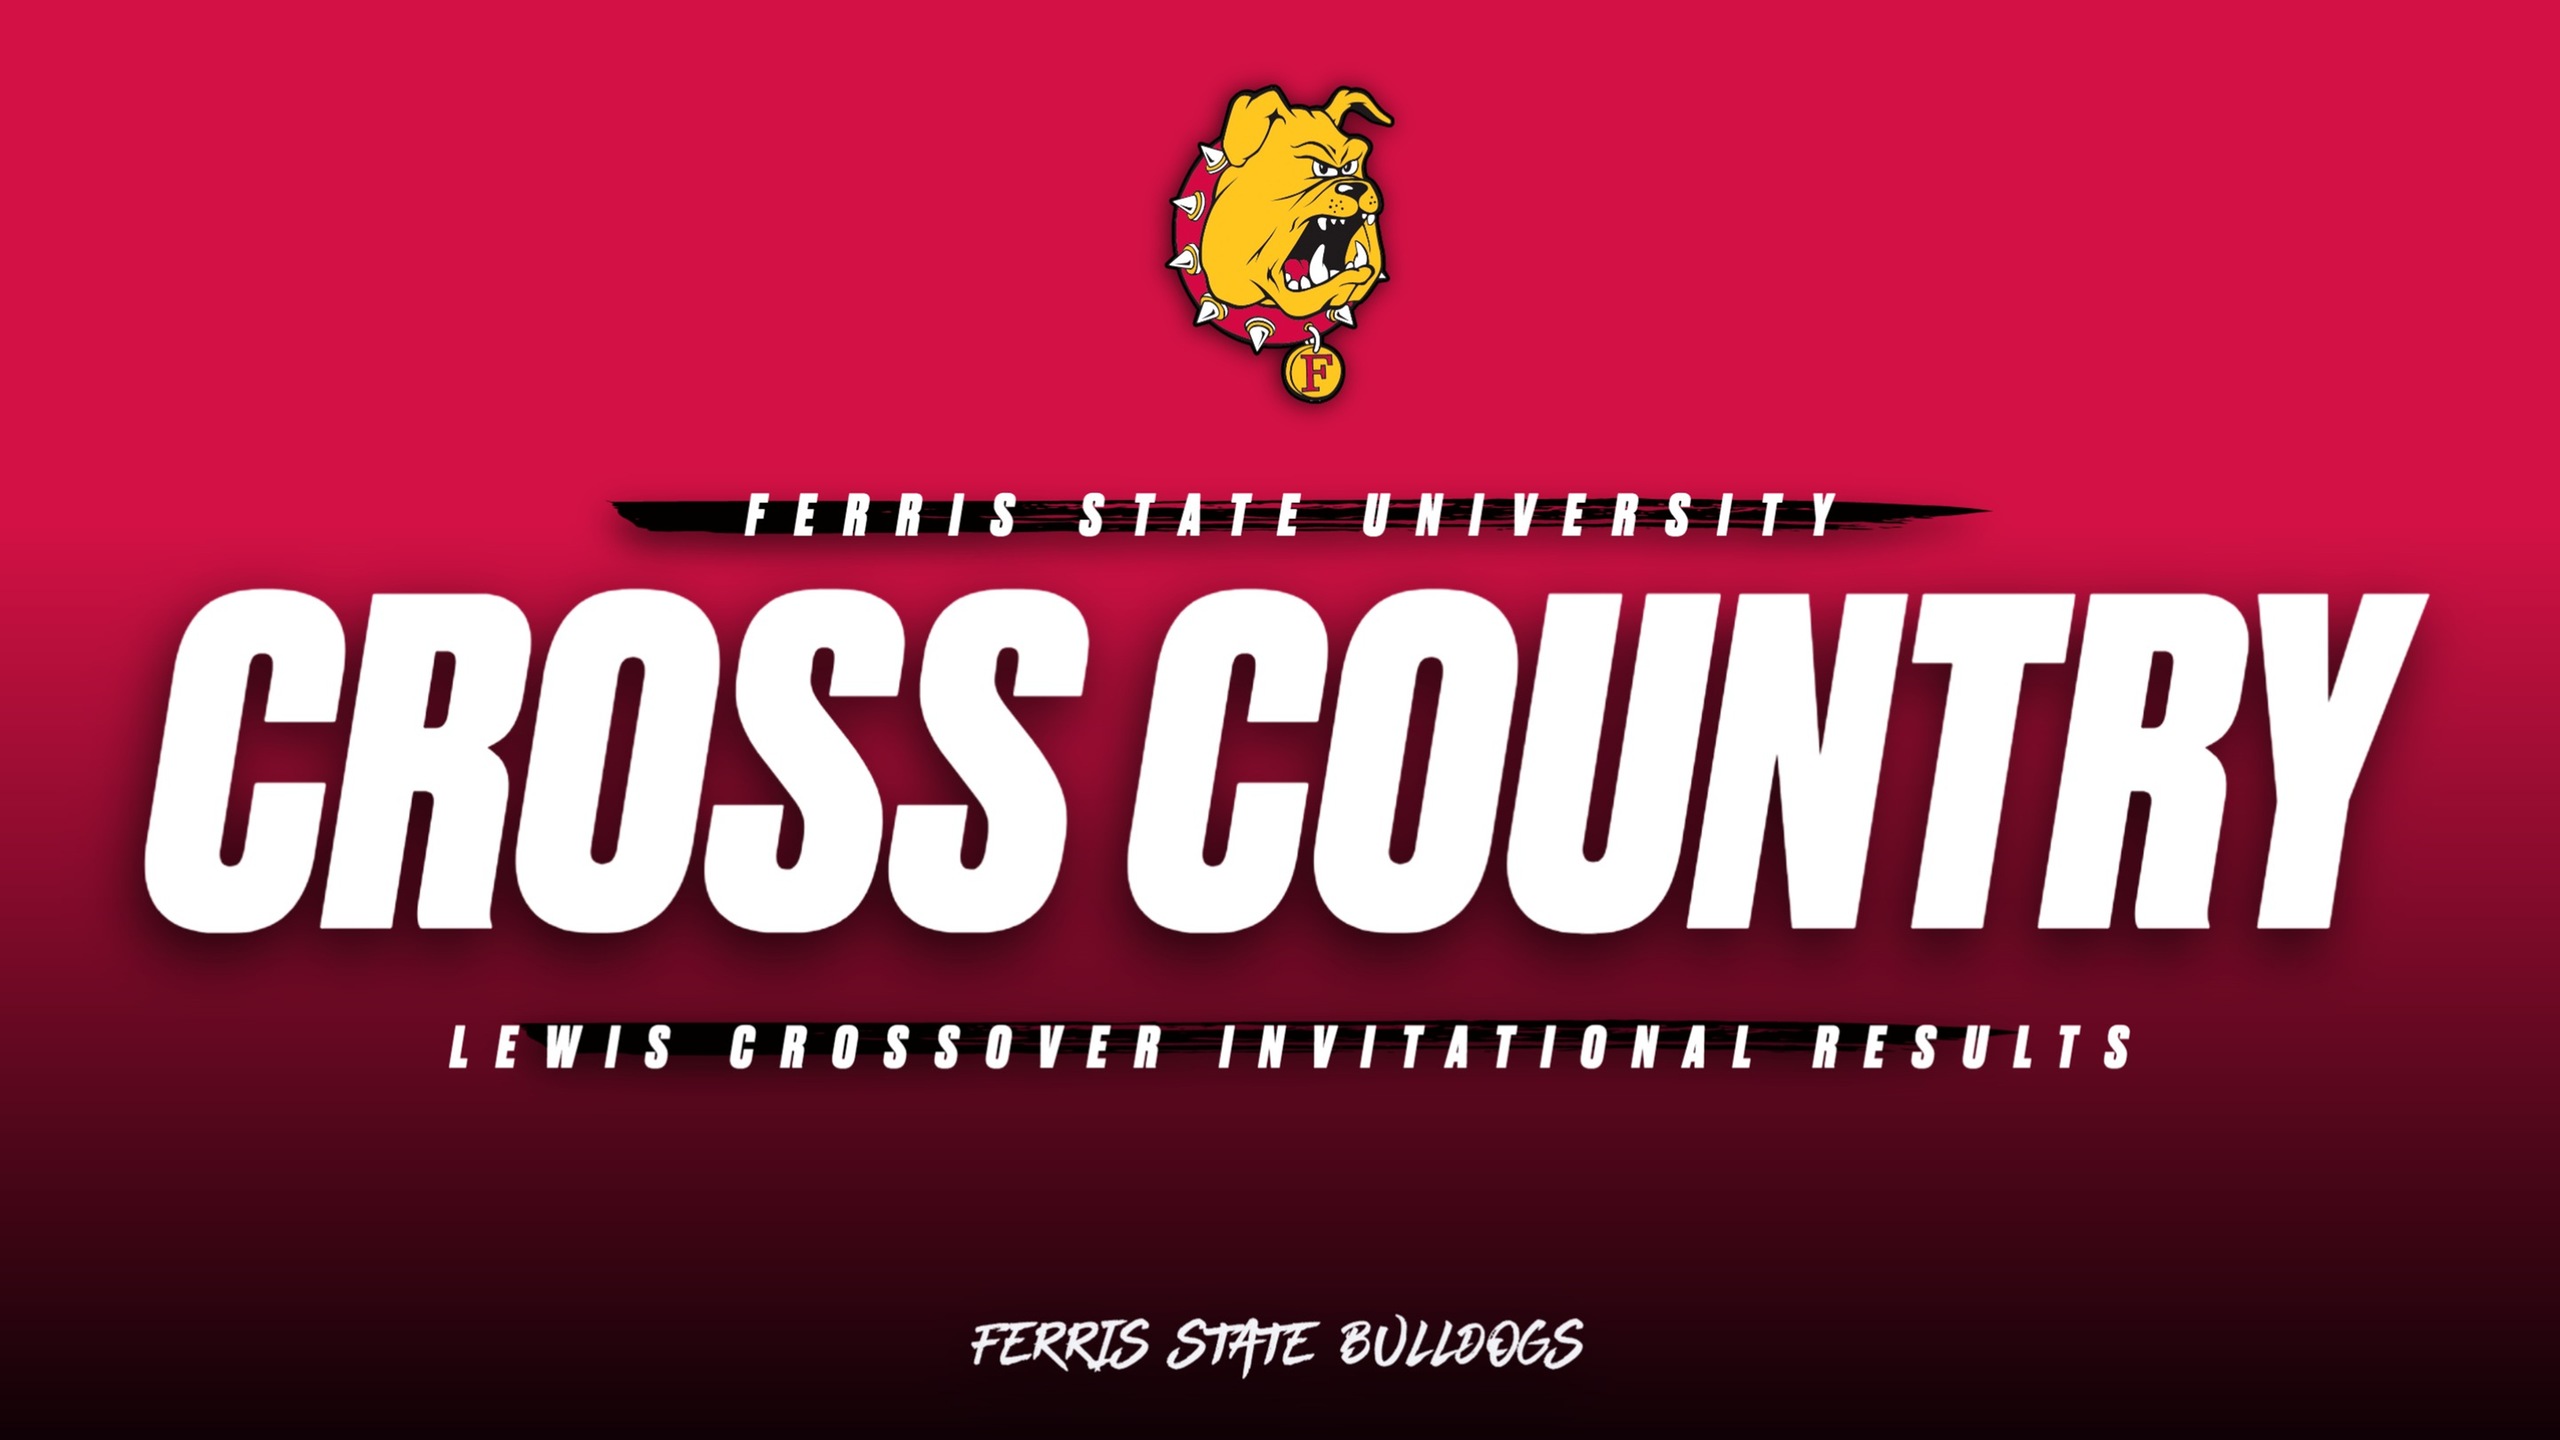 Ferris State Cross Country Steps Up Against Strong Competition At Lewis Crossover